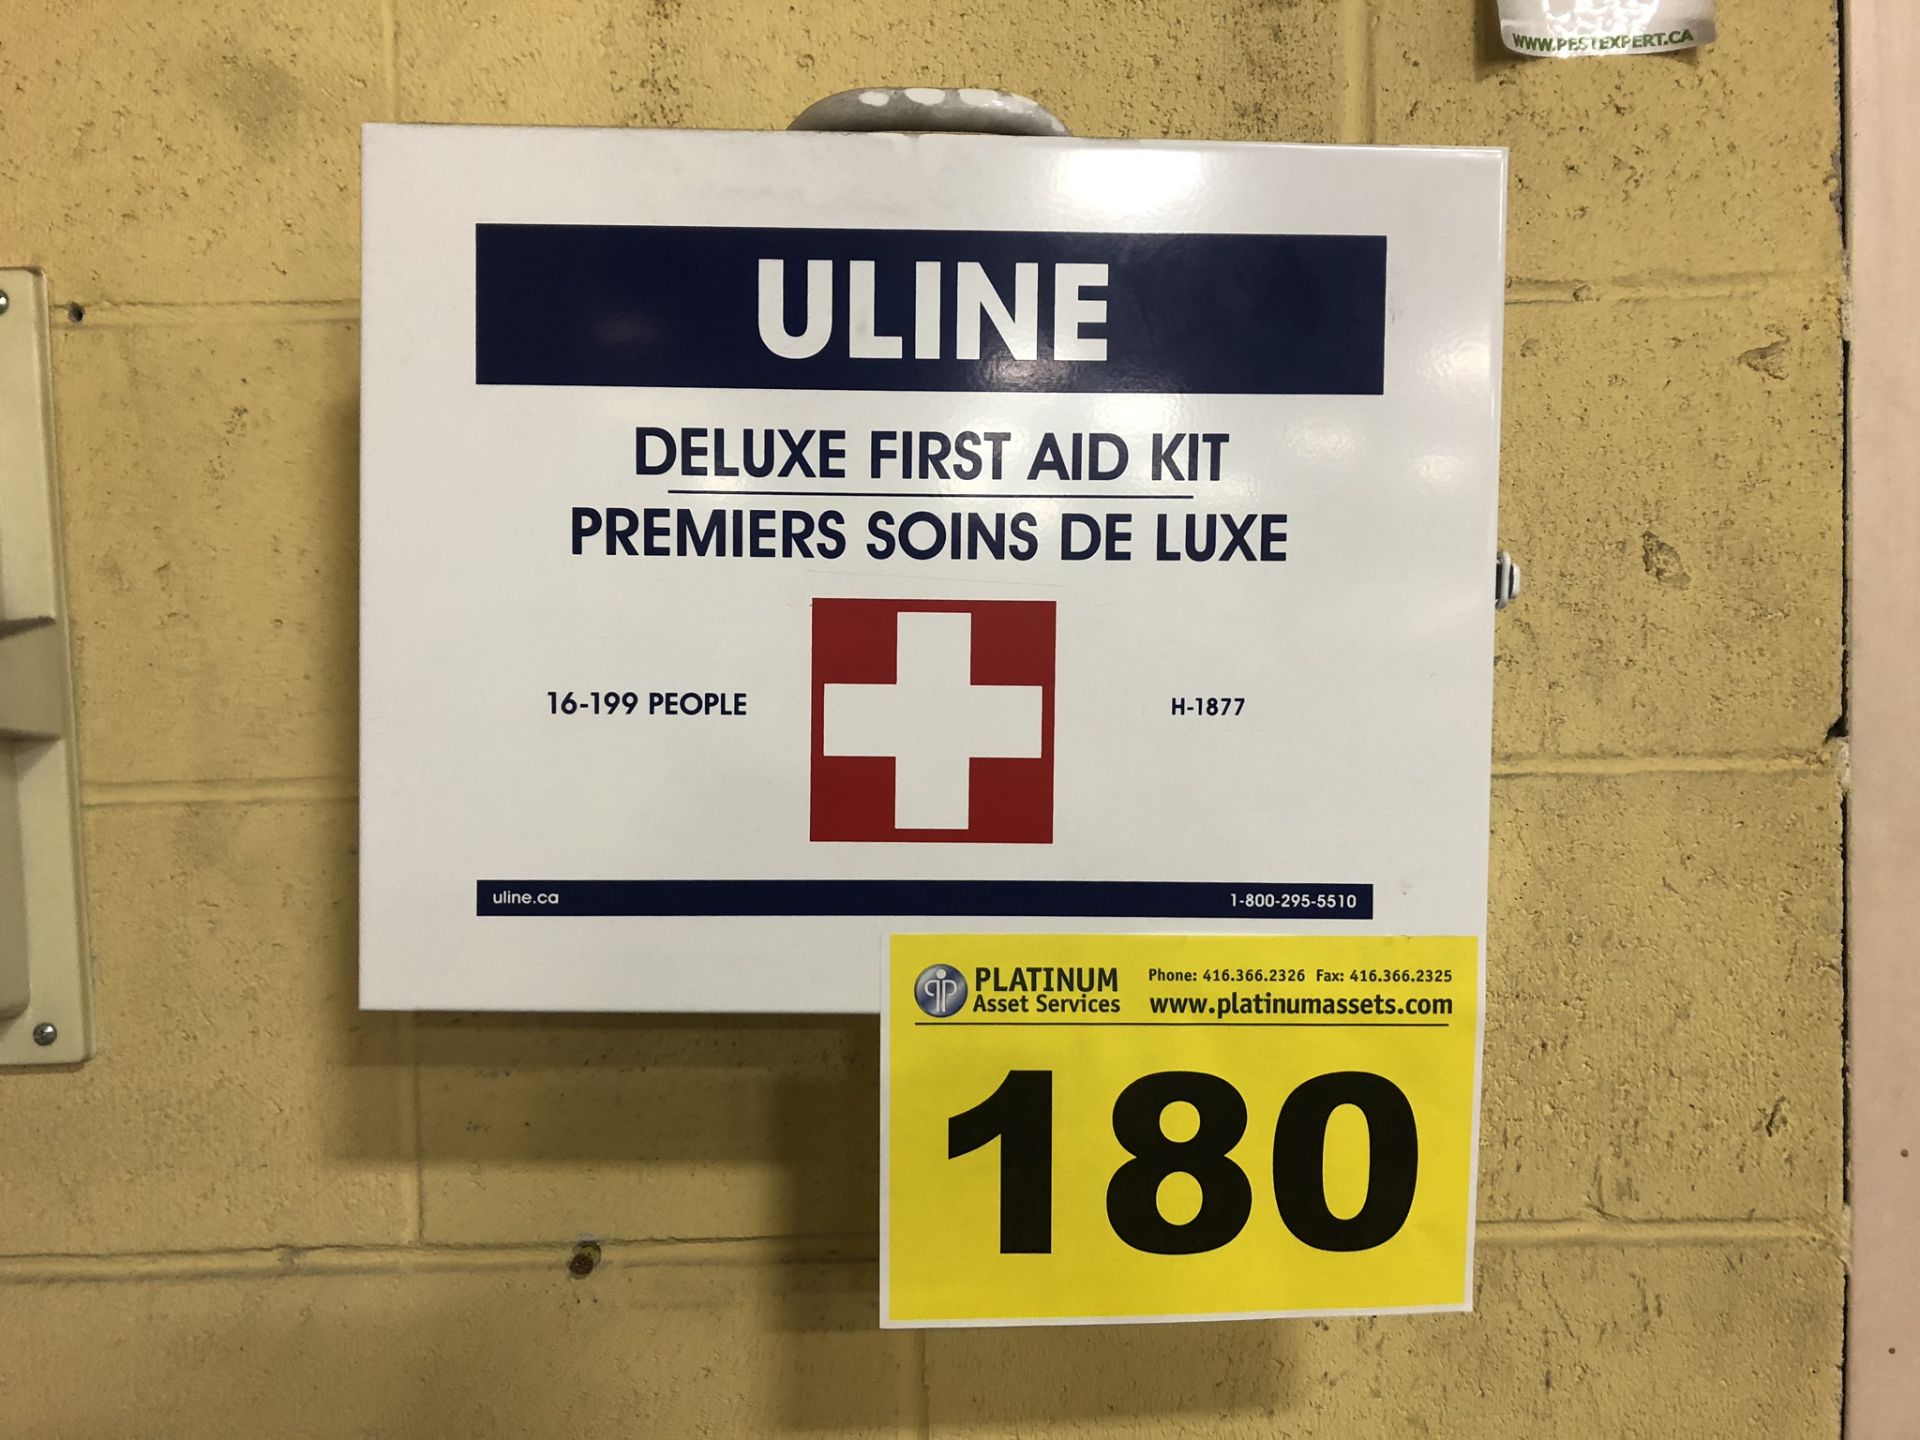 ULINE, H-1877, DELUXE FIRST AID KIT